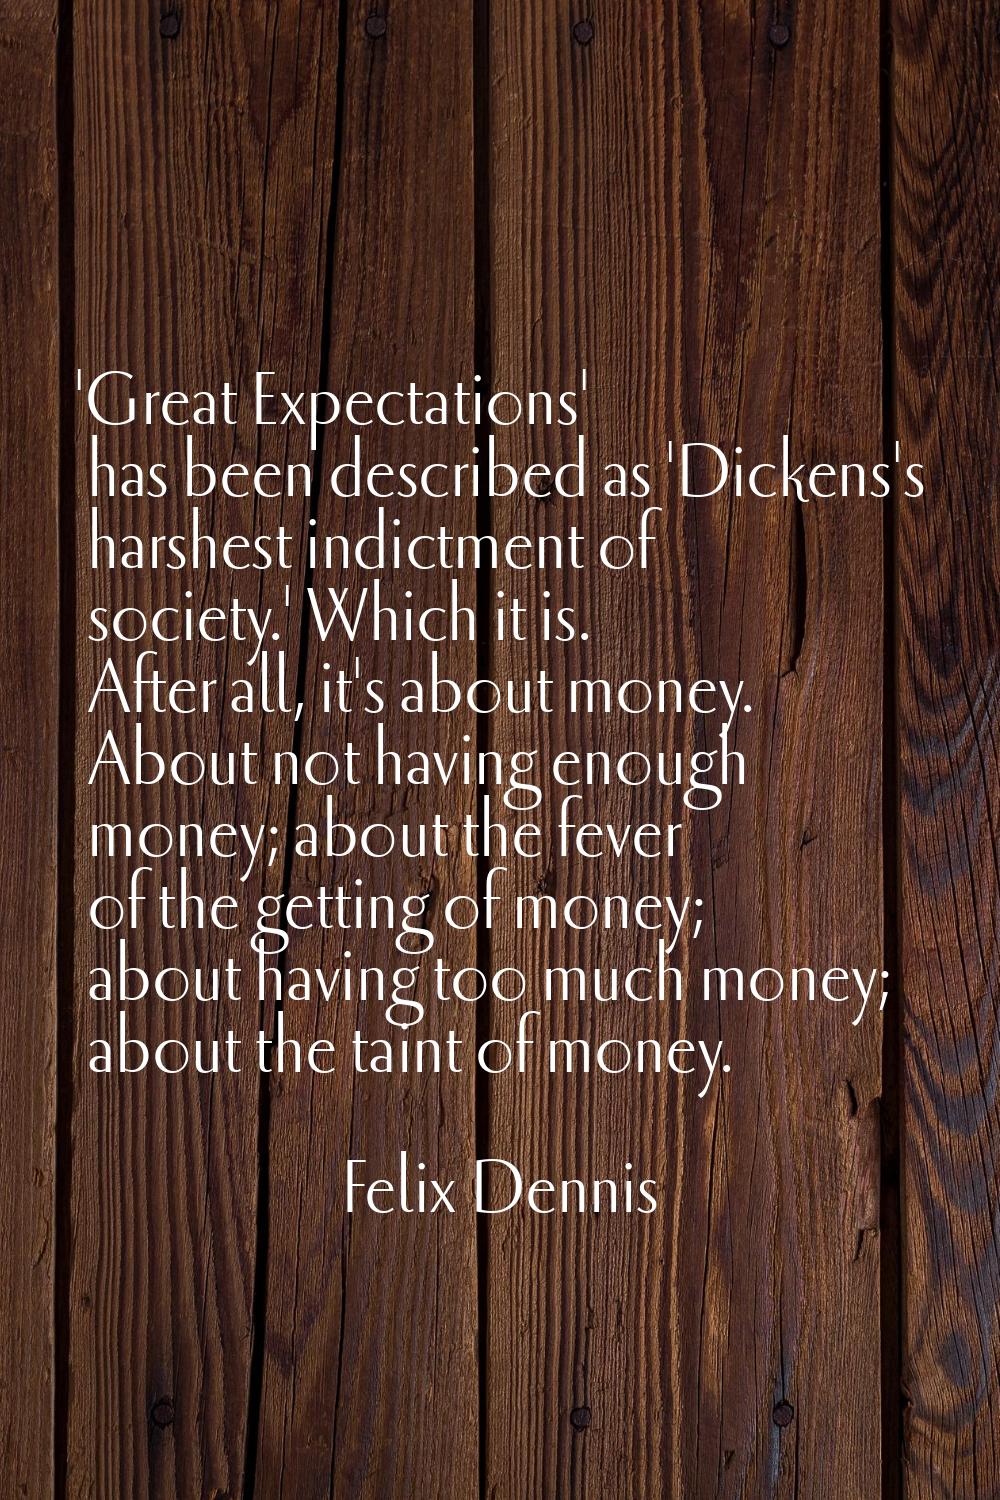 'Great Expectations' has been described as 'Dickens's harshest indictment of society.' Which it is.